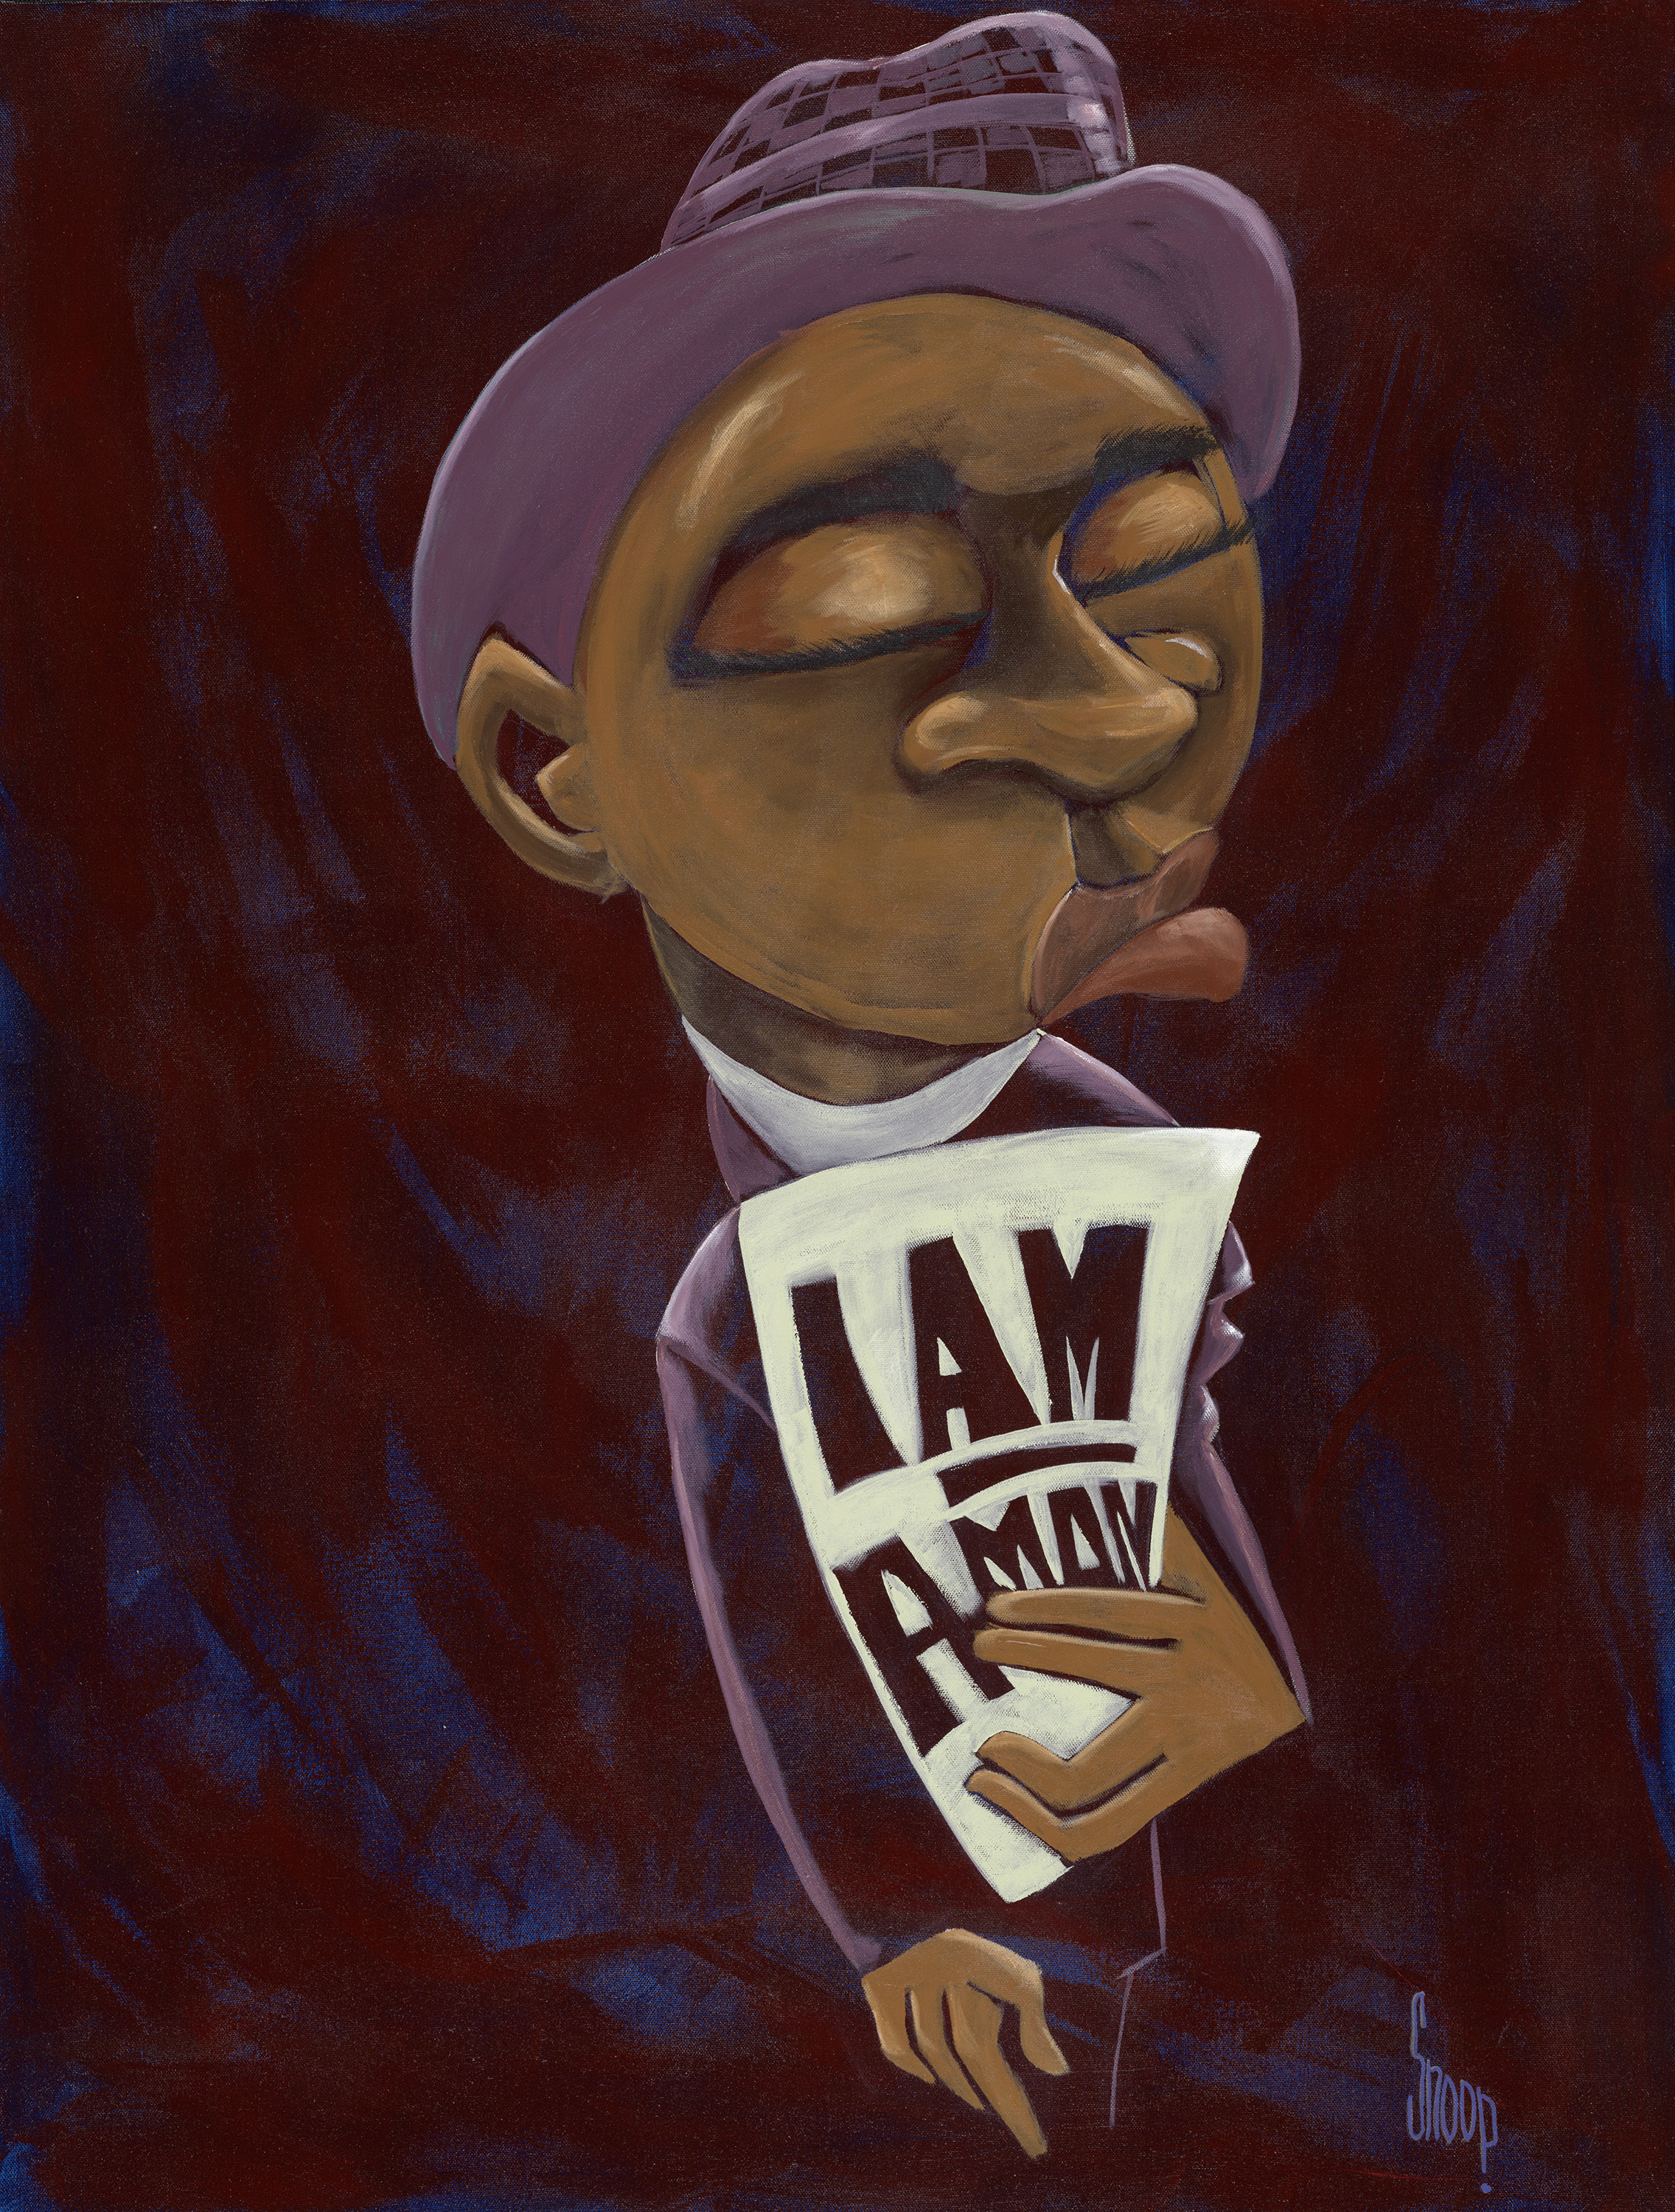 The Listening Party vol. 2 - Courage (art: Dig Nitty (I Am A Man) - by Levi Robinson)